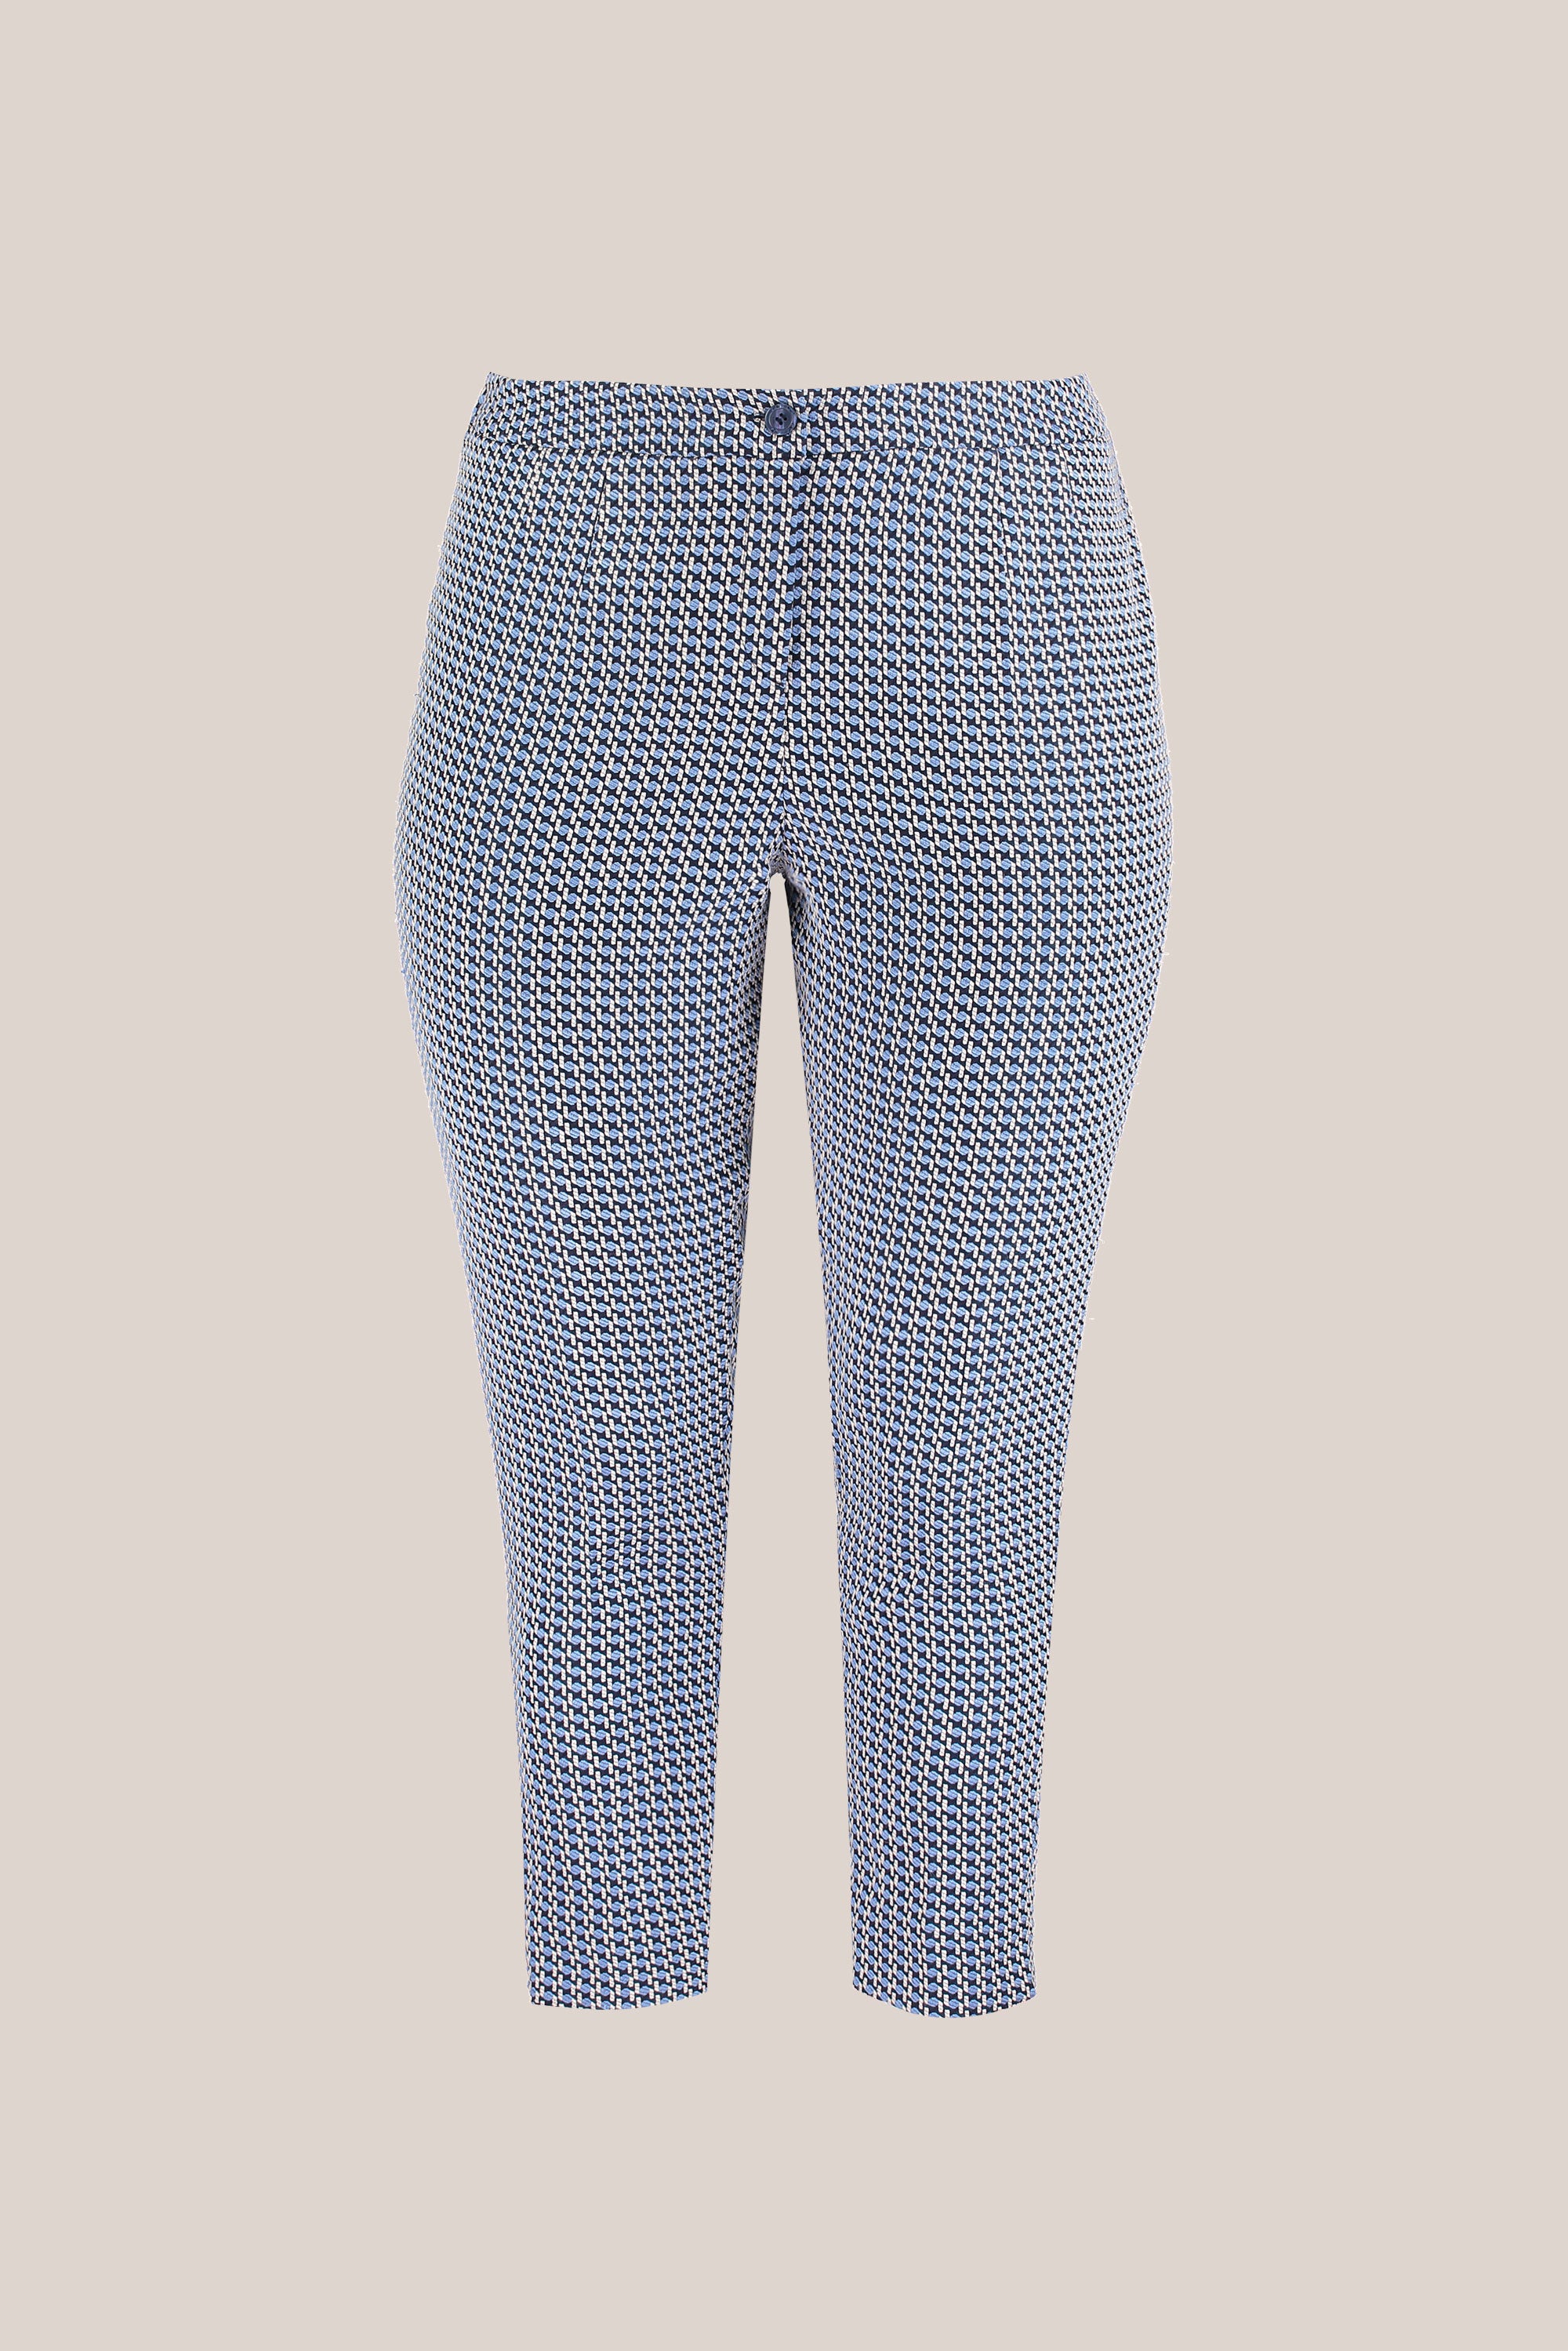 Jacquard Tailored Trousers